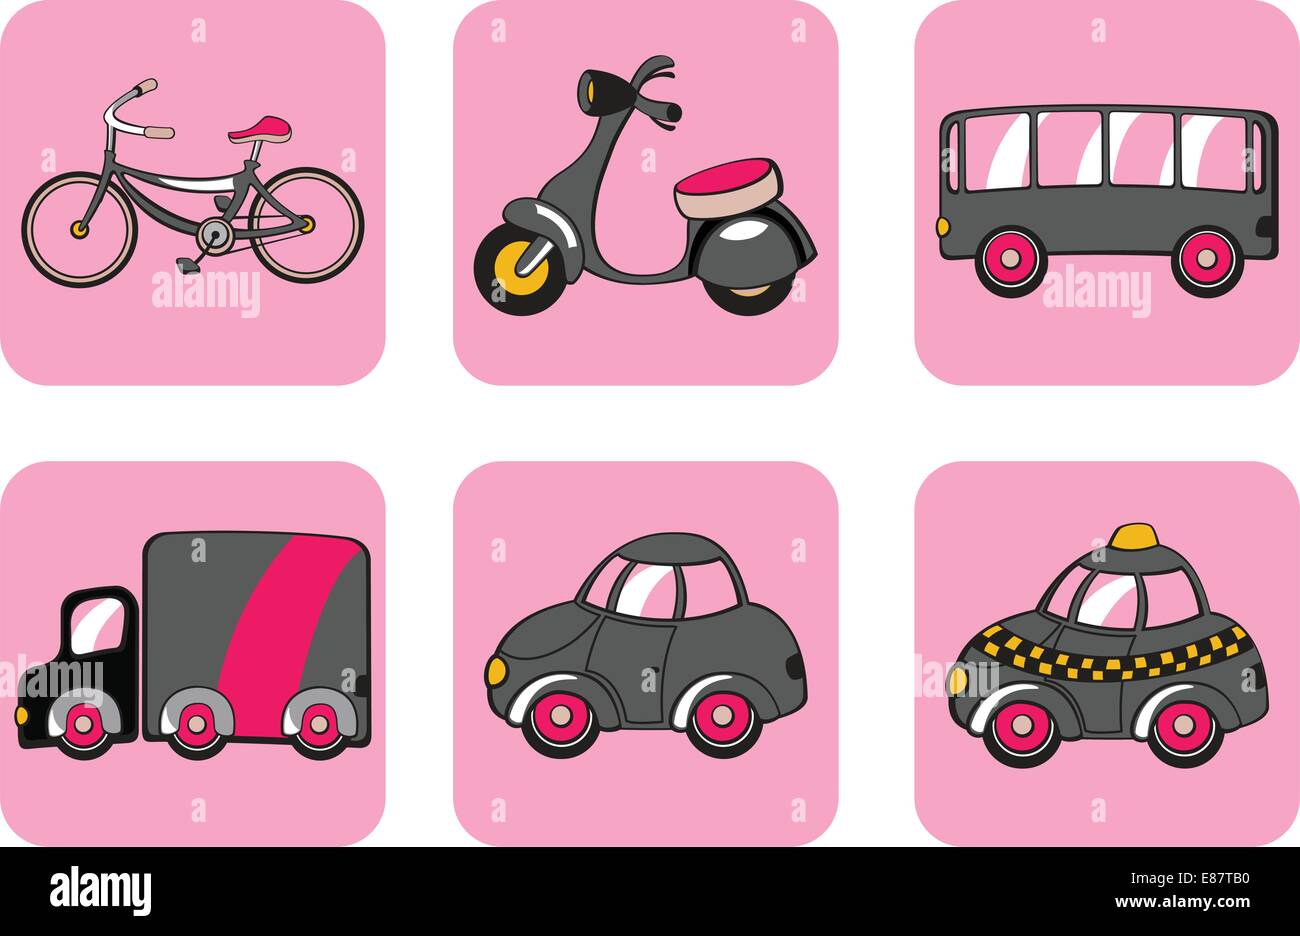 Vector Illustration of transportation icons. Includes bicycle, minibike, bus, track, car and taxi on the pink background. Stock Vector